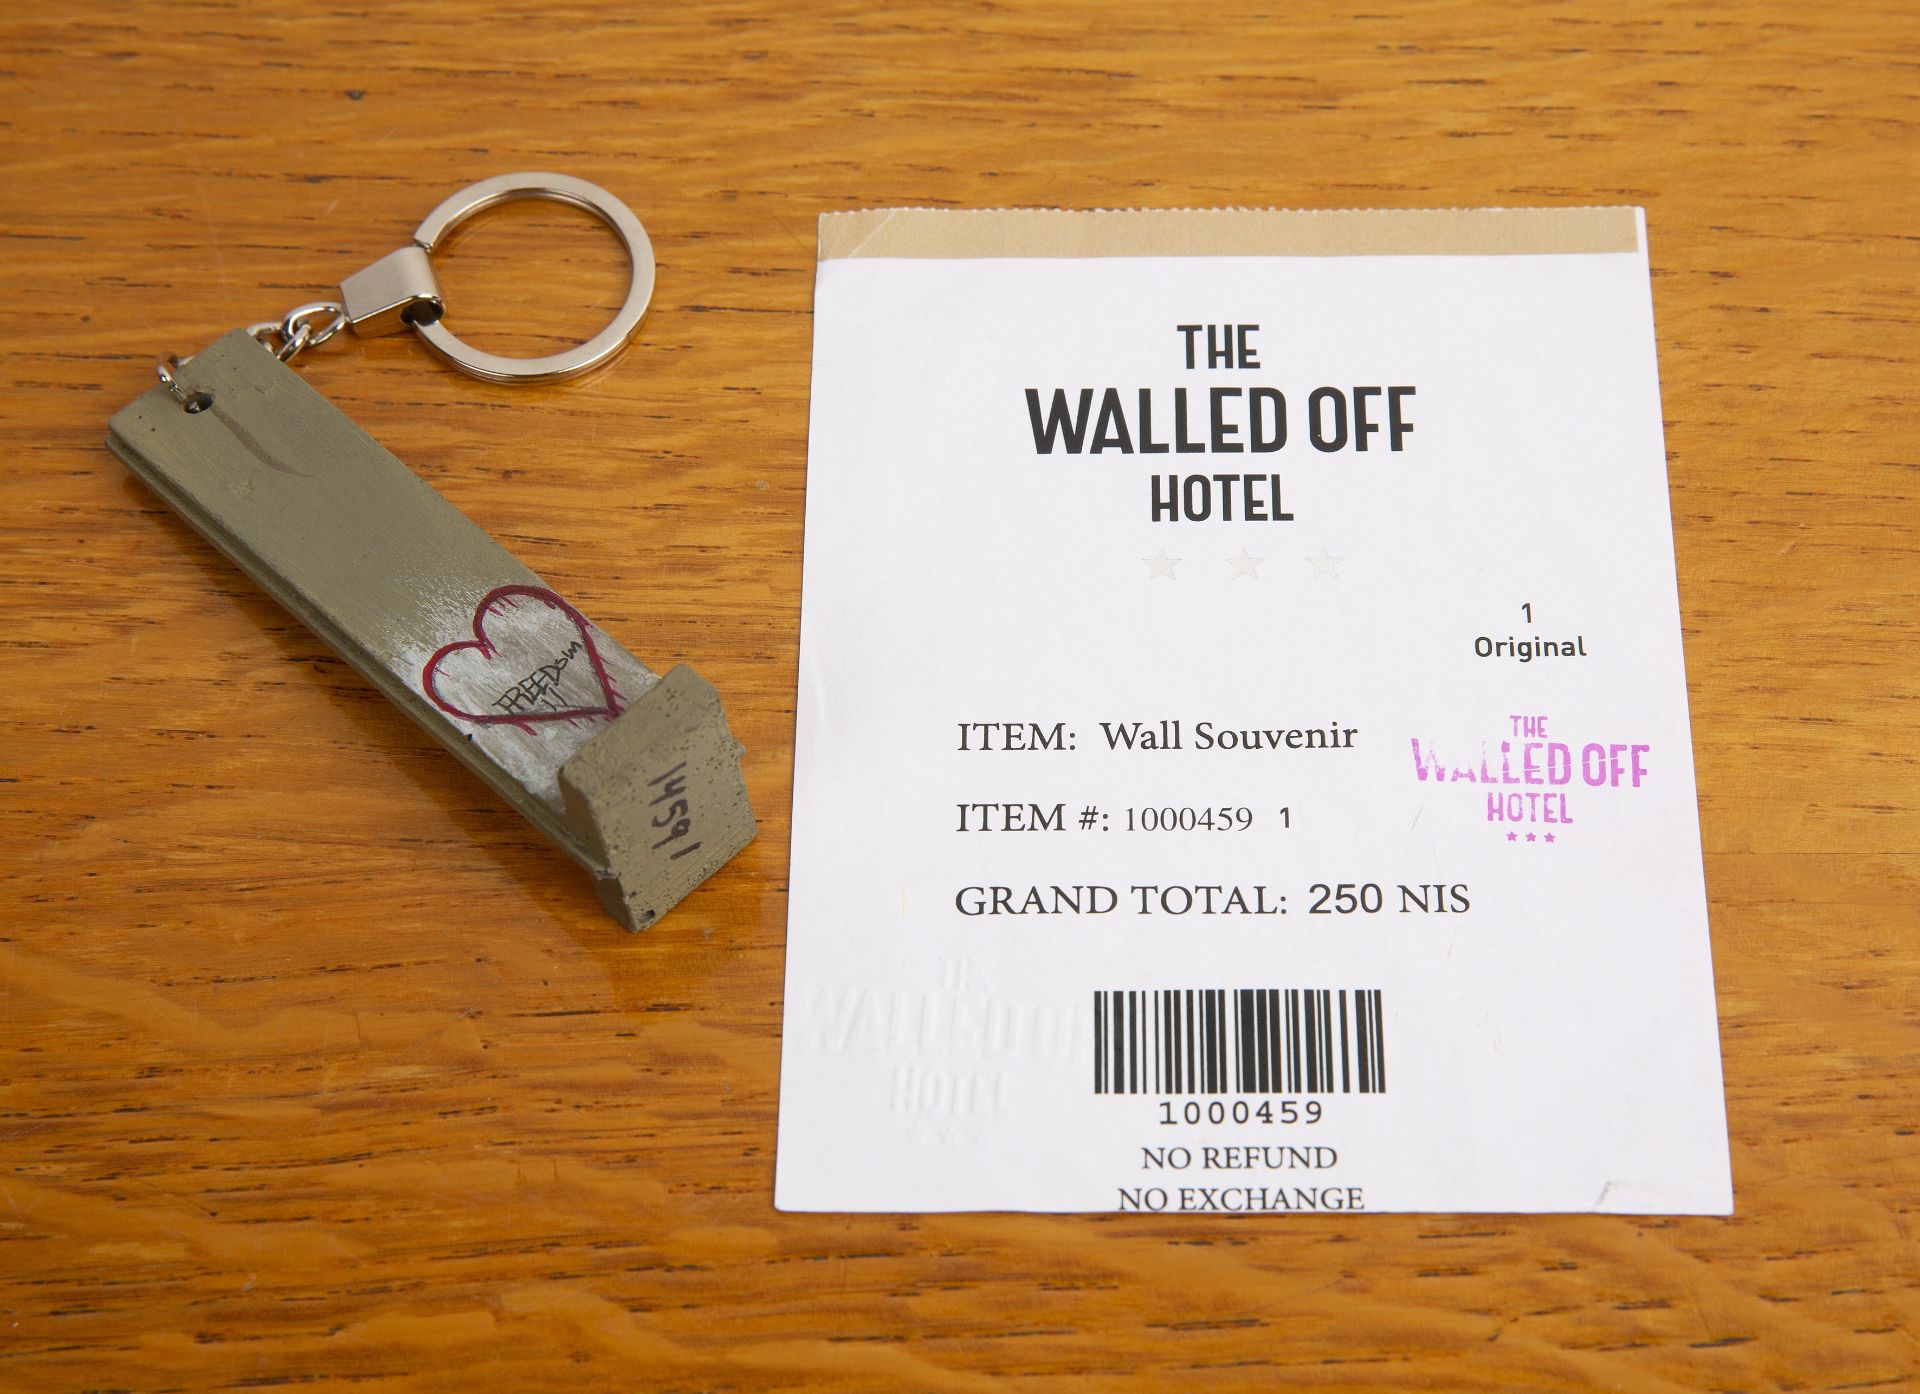 Banksy (b.1974) (The walled off hotel), freedom sculpture or key fob, painted wood, numbered 14591 - Bild 6 aus 6